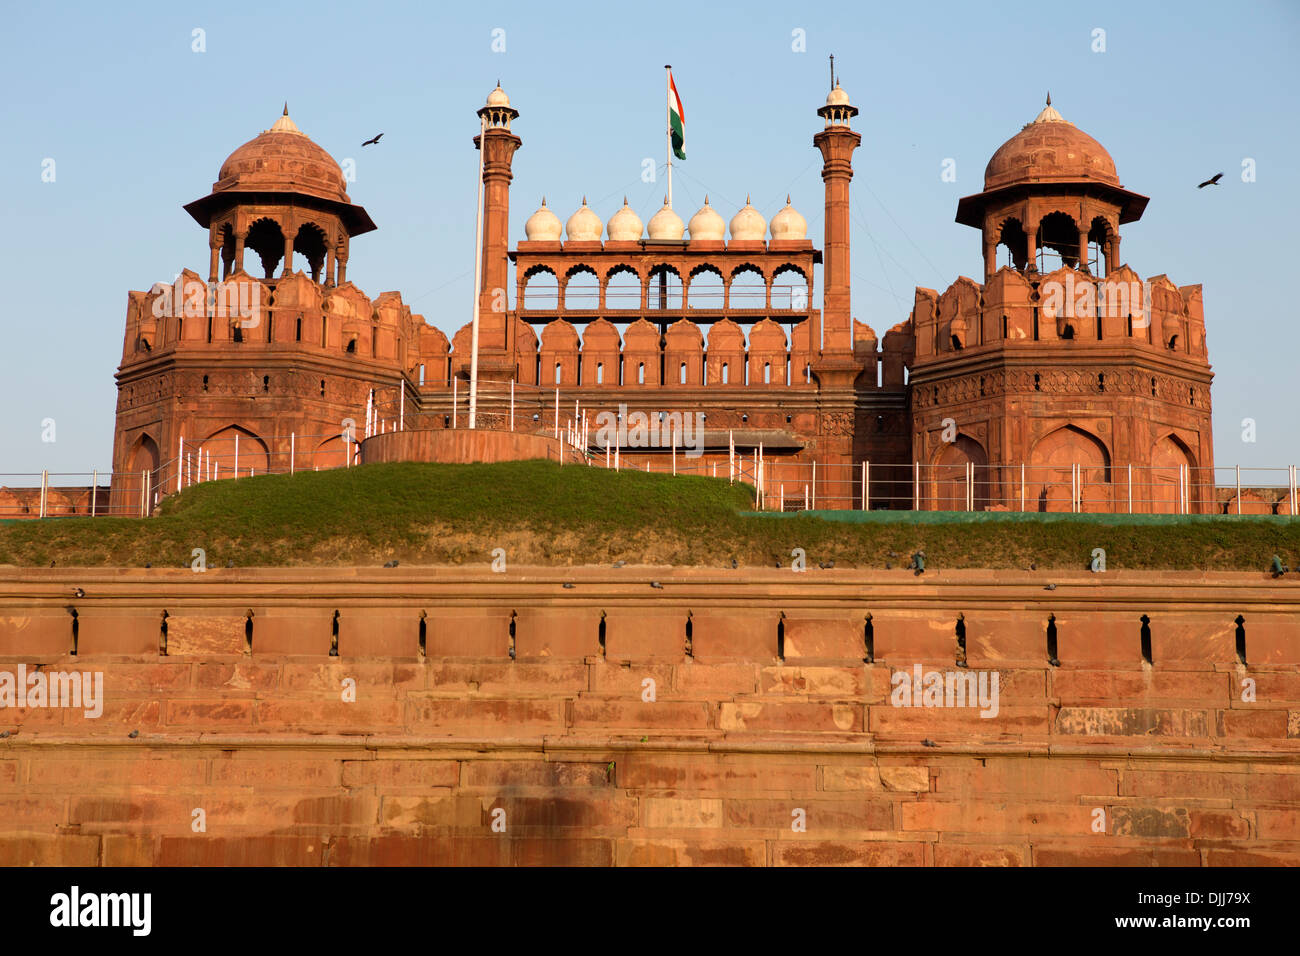 Walls of the Red Fort. The impressive wall was built in red sandstone. Stock Photo